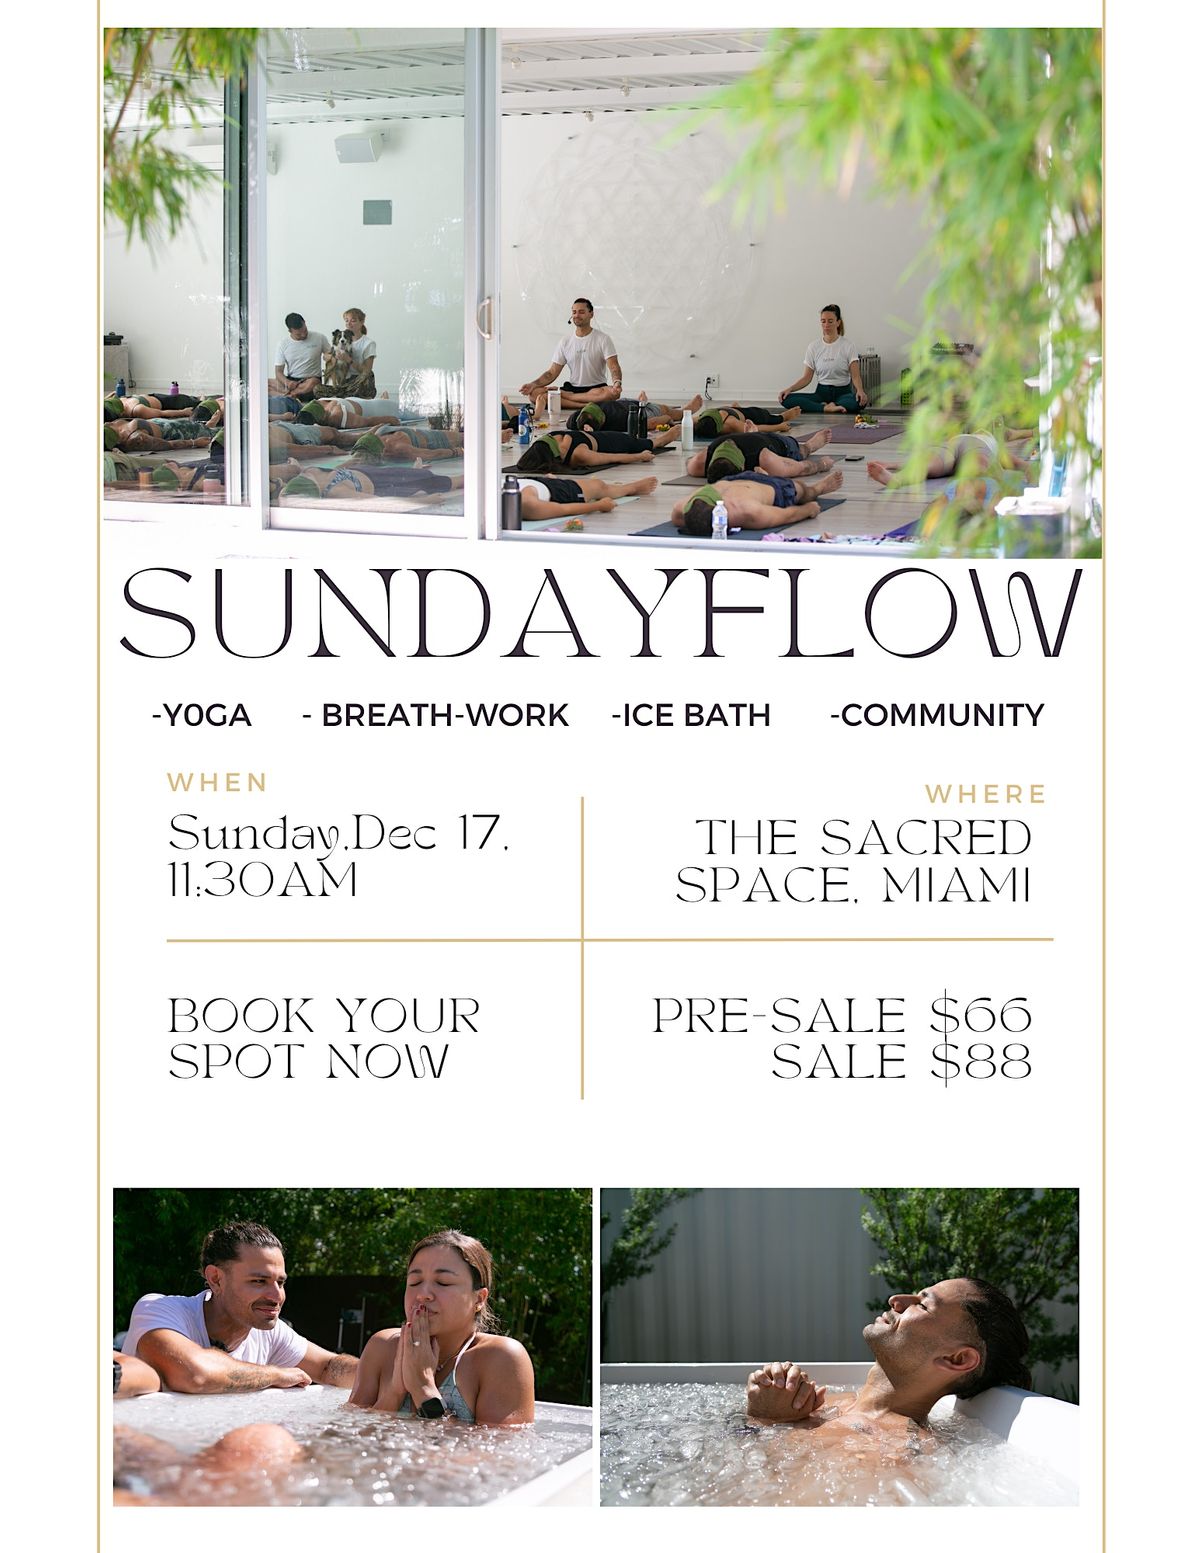 SUNDAY  FLOW EXPERIENCE AT THE SACRED SPACE